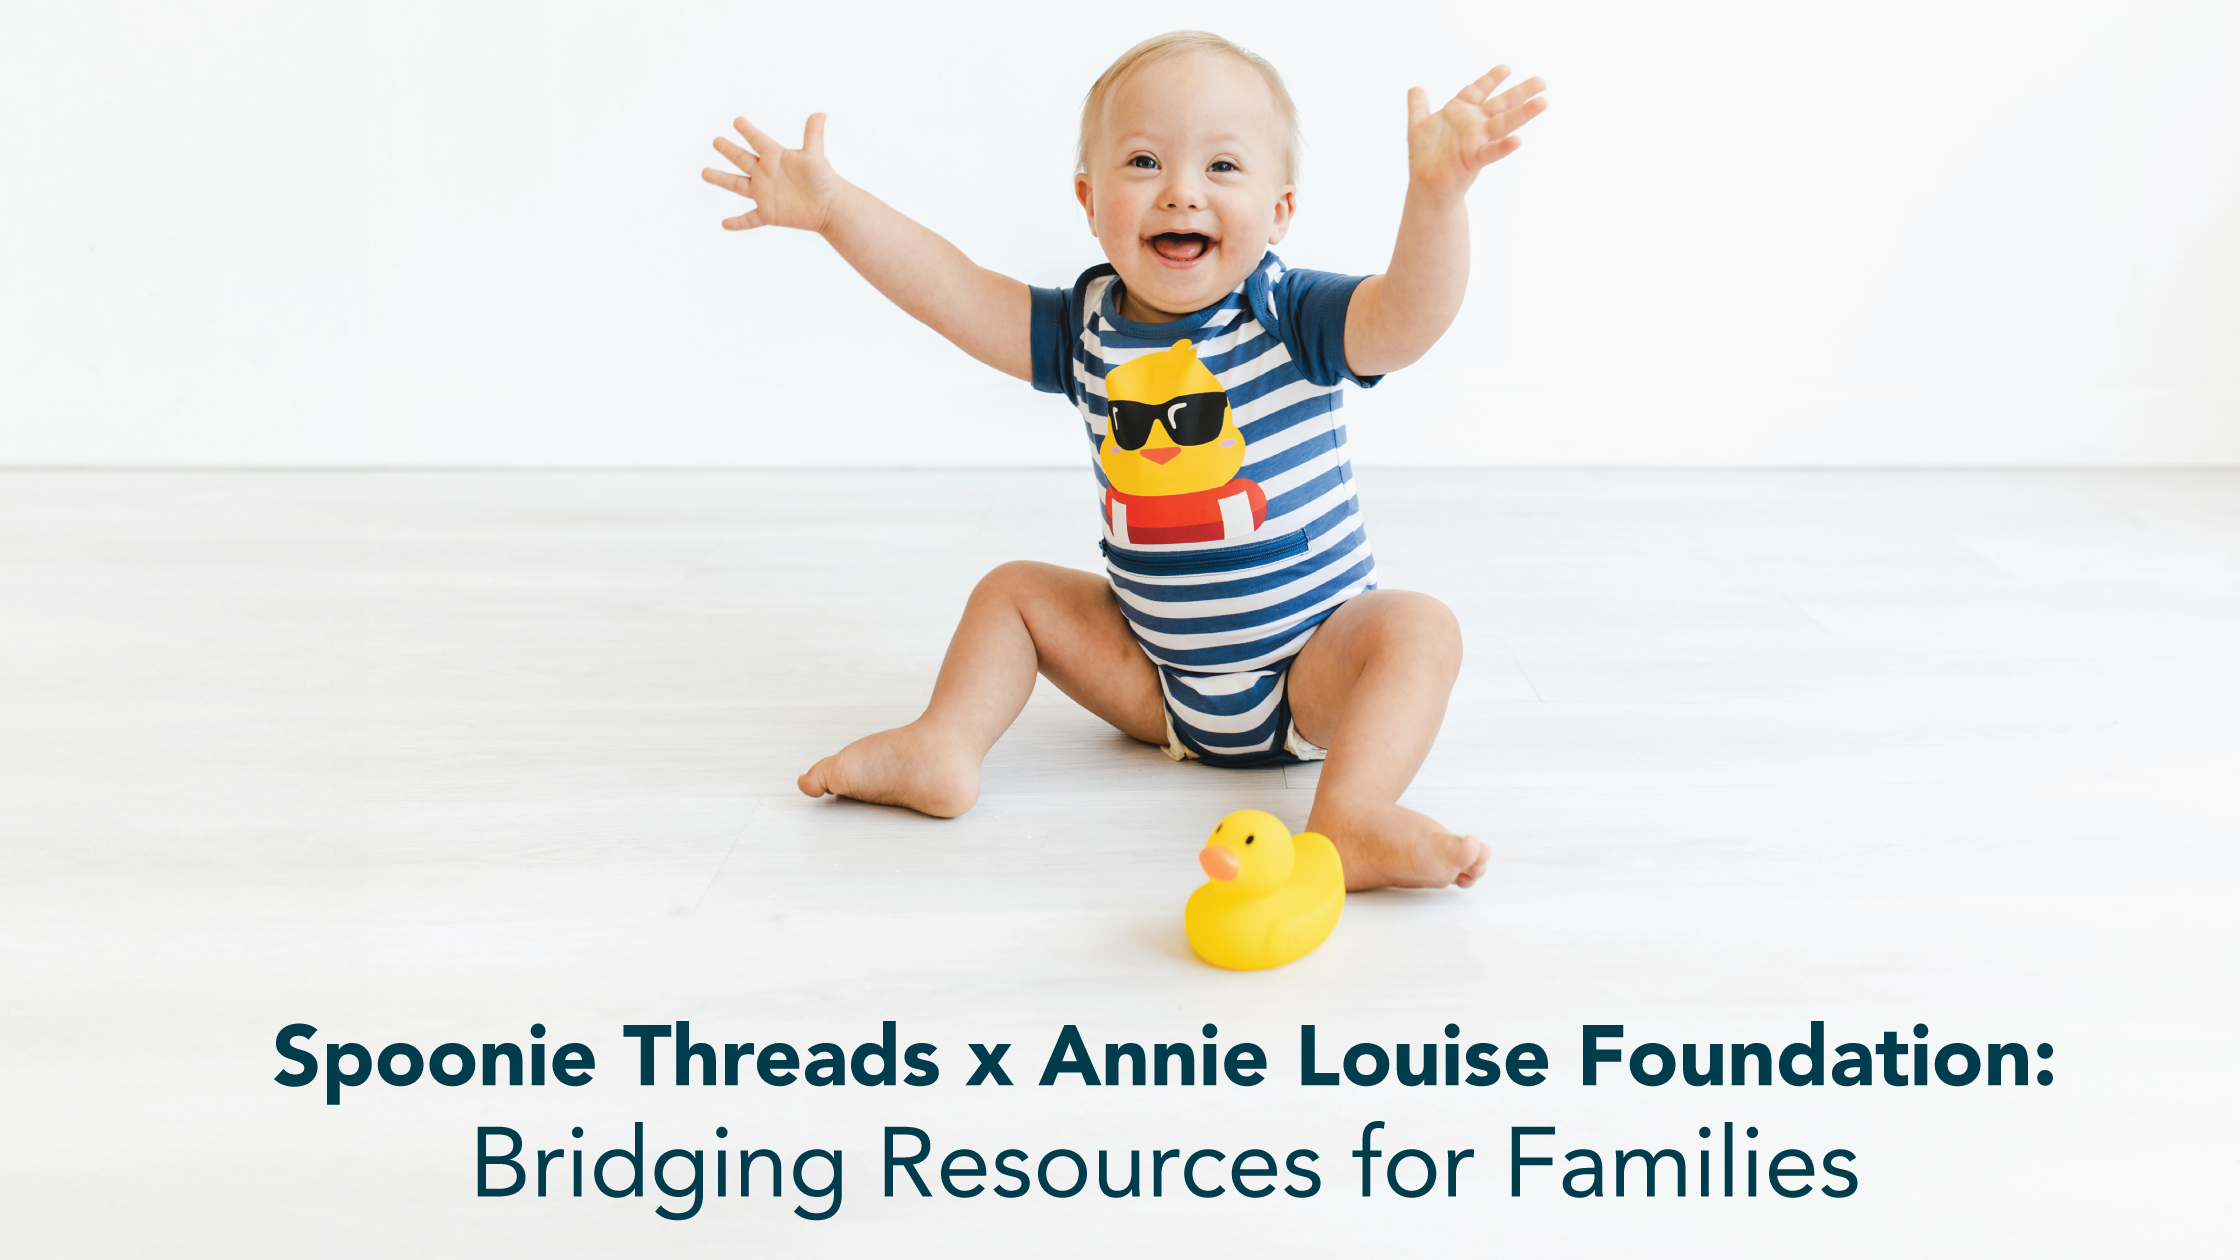 Spoonie Threads x Annie Louise Foundation: Bridging Resources for Families